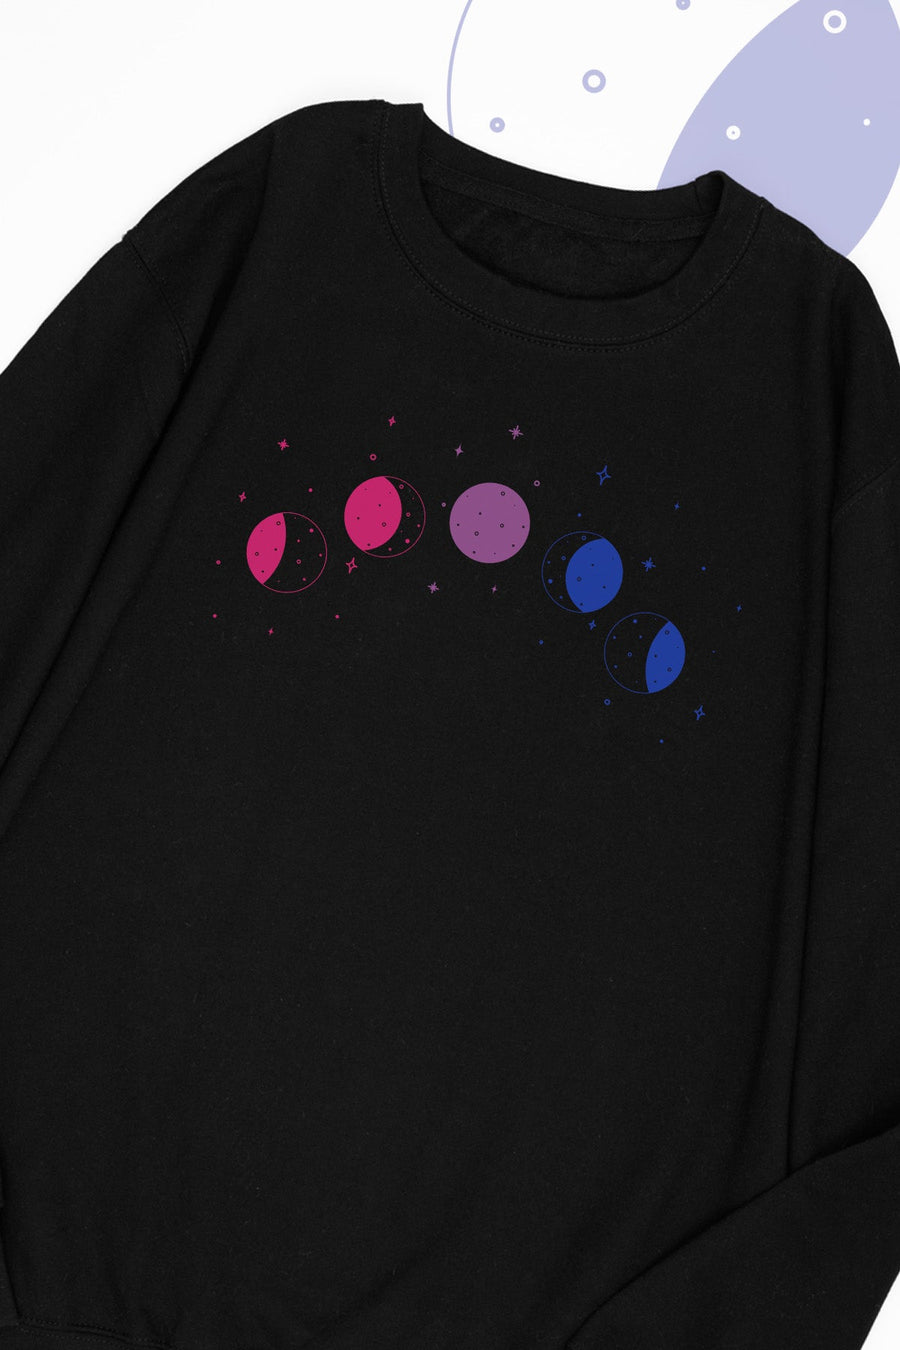 Celestial Moon Phase Bisexual Sweat